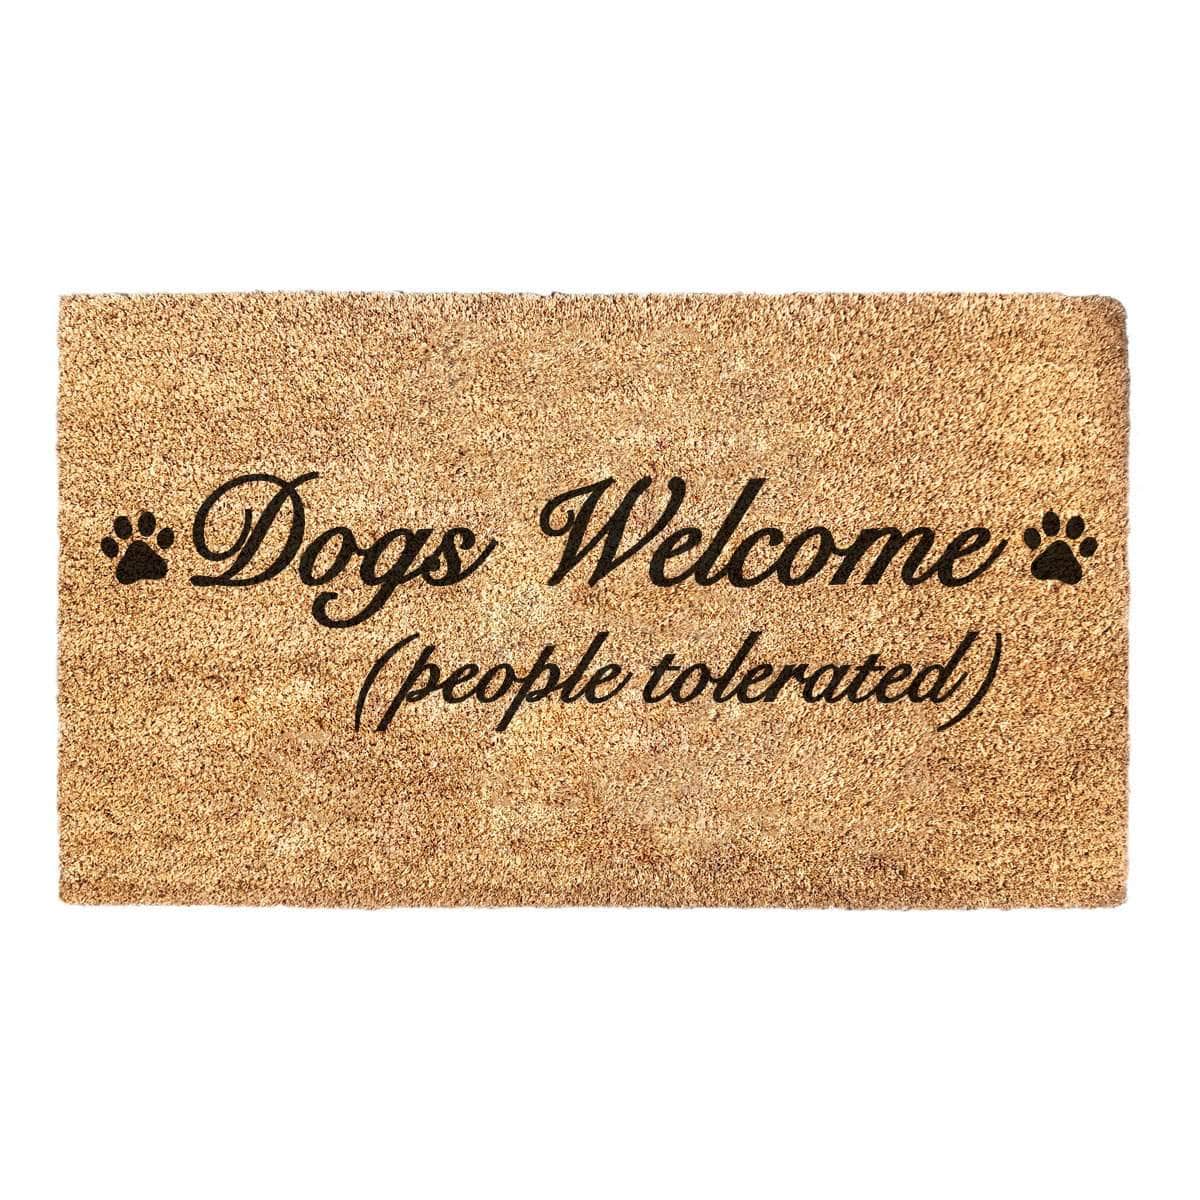 Dogs Welcome (People Tolerated) - Doormat